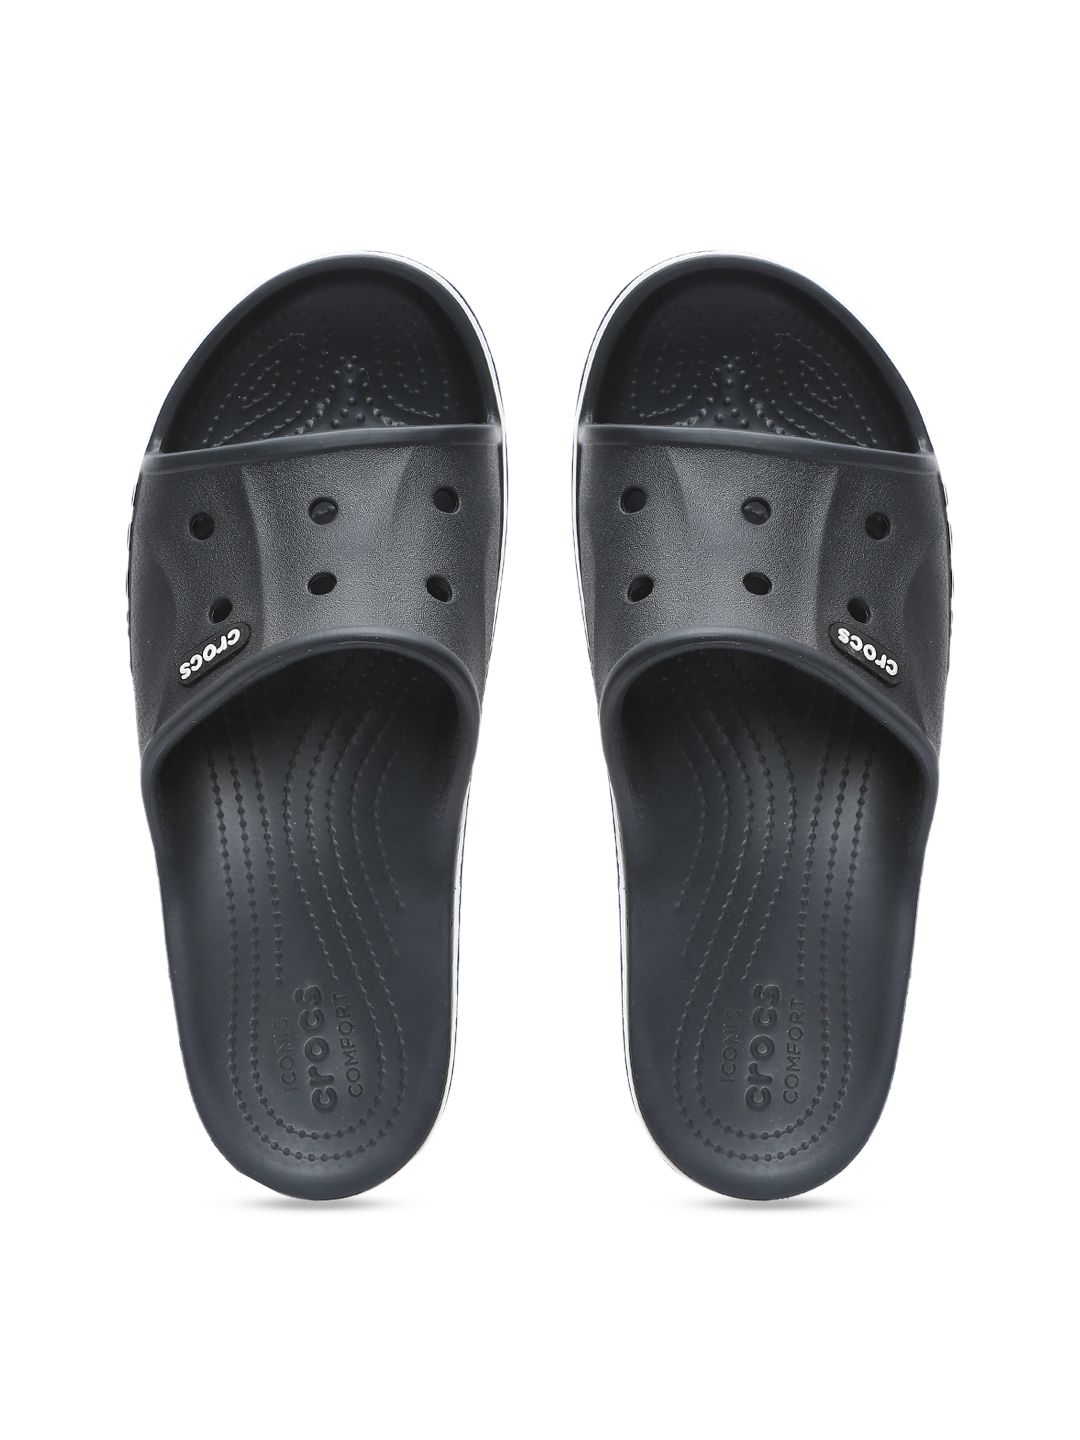 Crocs Bayaband Unisex Black Solid Solid Sliders Price in India